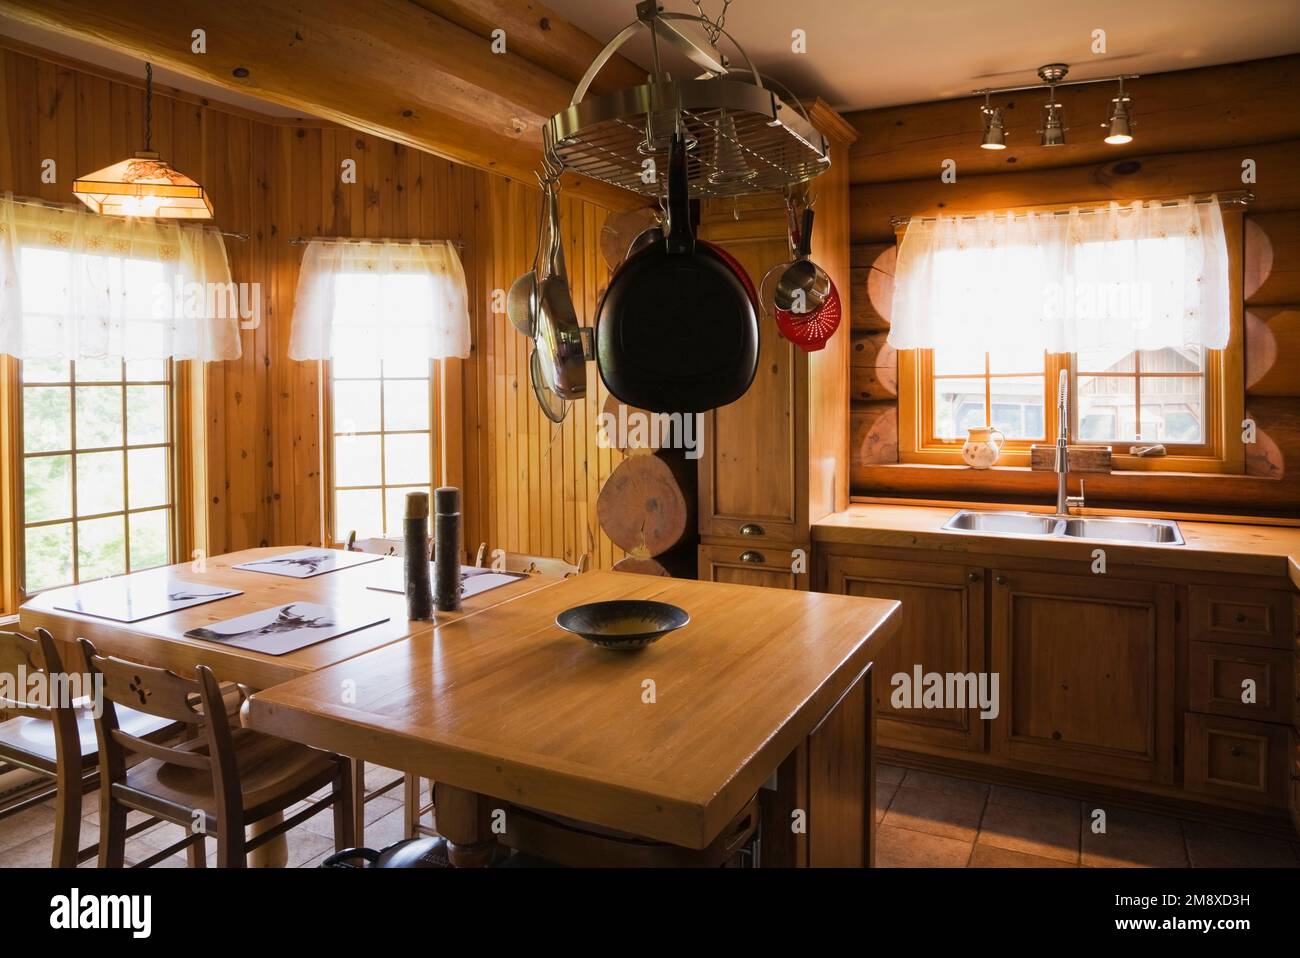 Pine wood cabinets, dining table and island in kitchen inside Scandinavian cottage style log home. Stock Photo